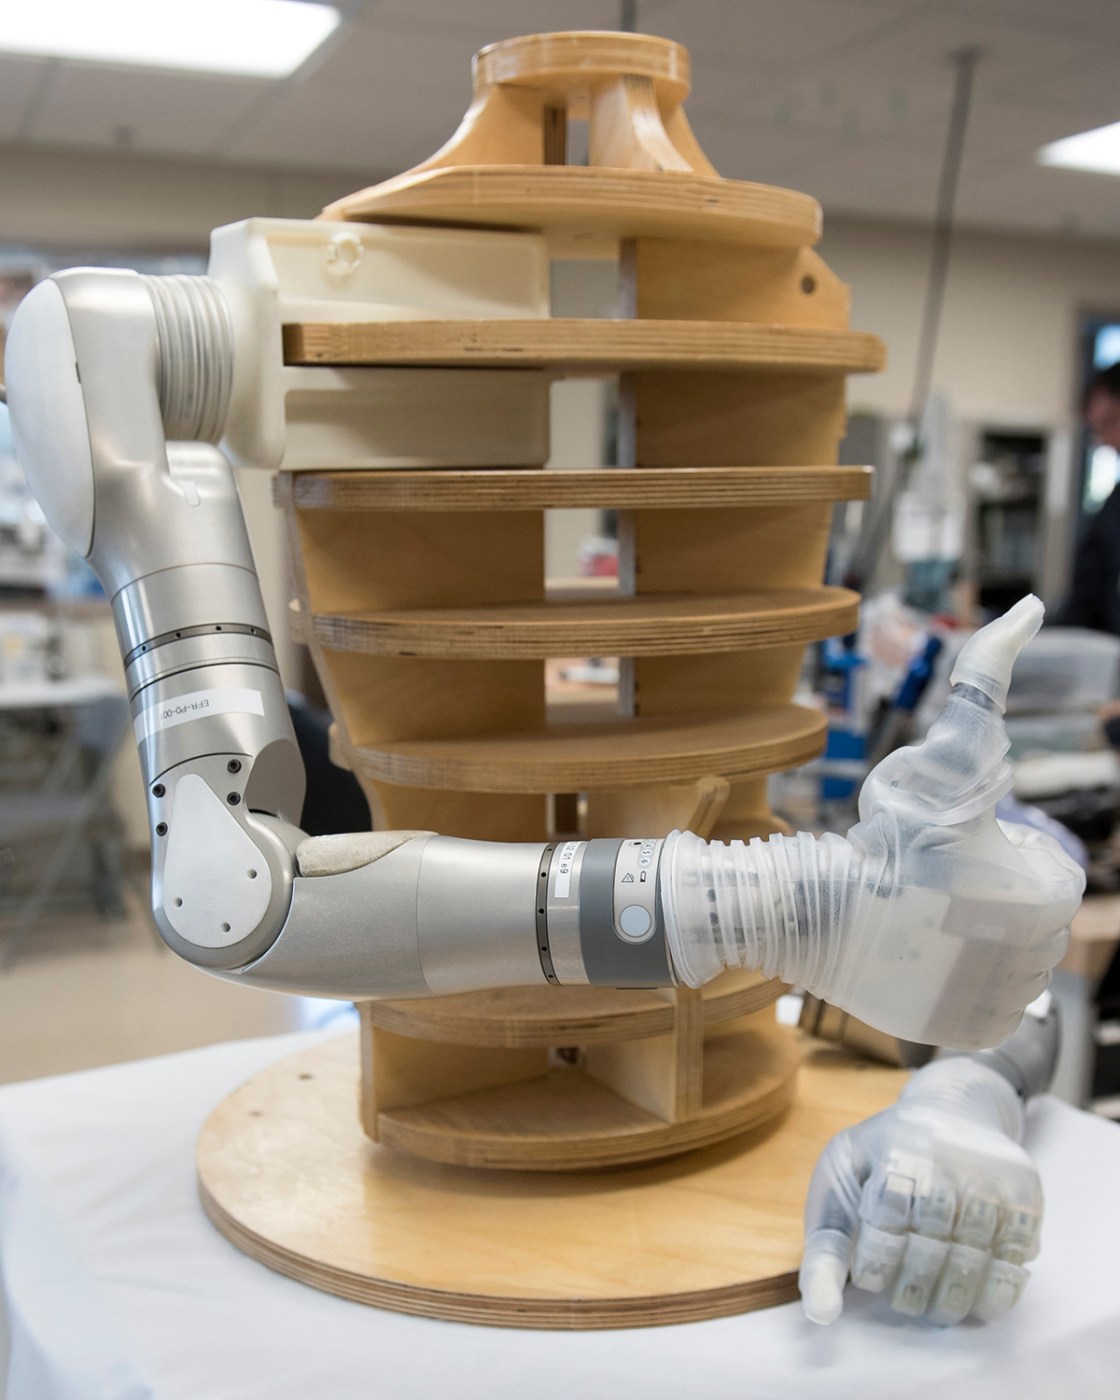 The LUKE arm, the prosthetic product of eight years of research and development by DEKA Integrated Solutions. The design marked a significant advance over existing prostheses, with innovative features like pre-programmed hand grips and powered joints capable of simultaneous movement. (darpa.mil) 